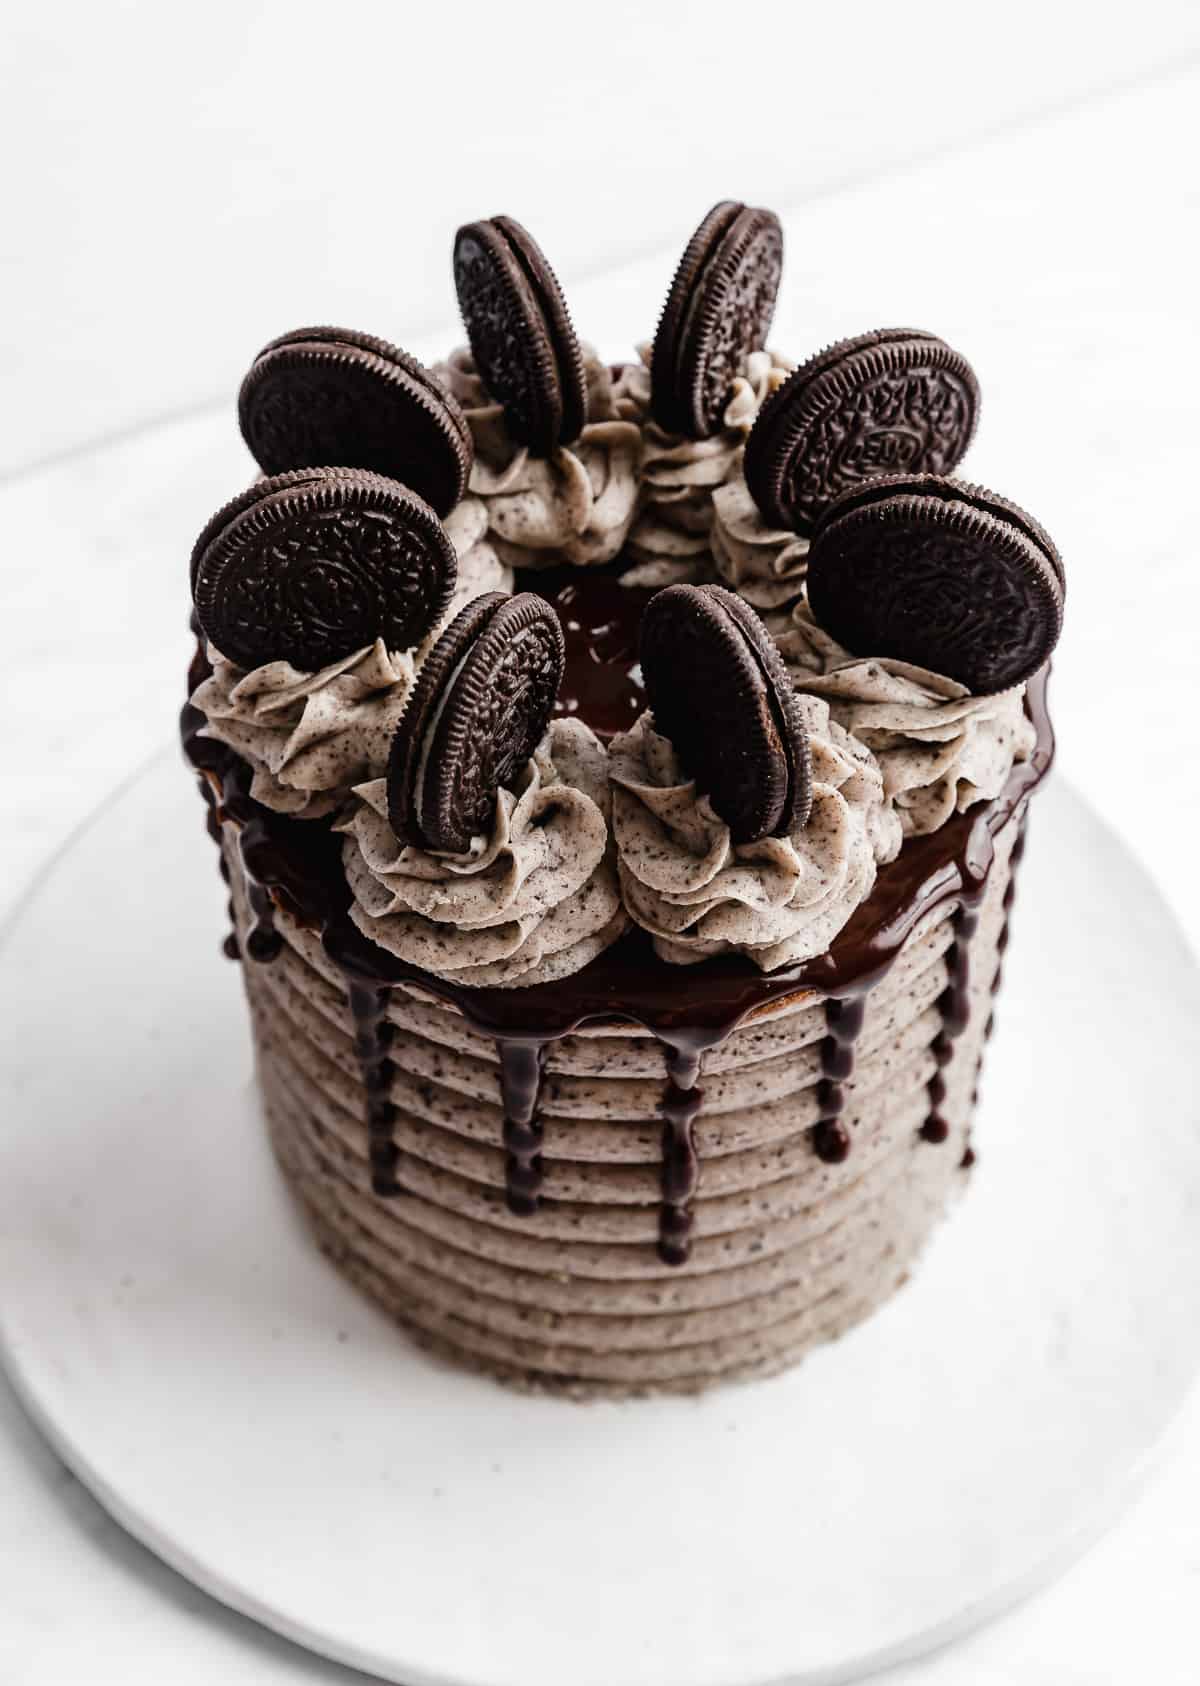 A Coconut Cookies and Cream Cake topped with chocolate ganache, frosting swirls, and Oreo cookies.